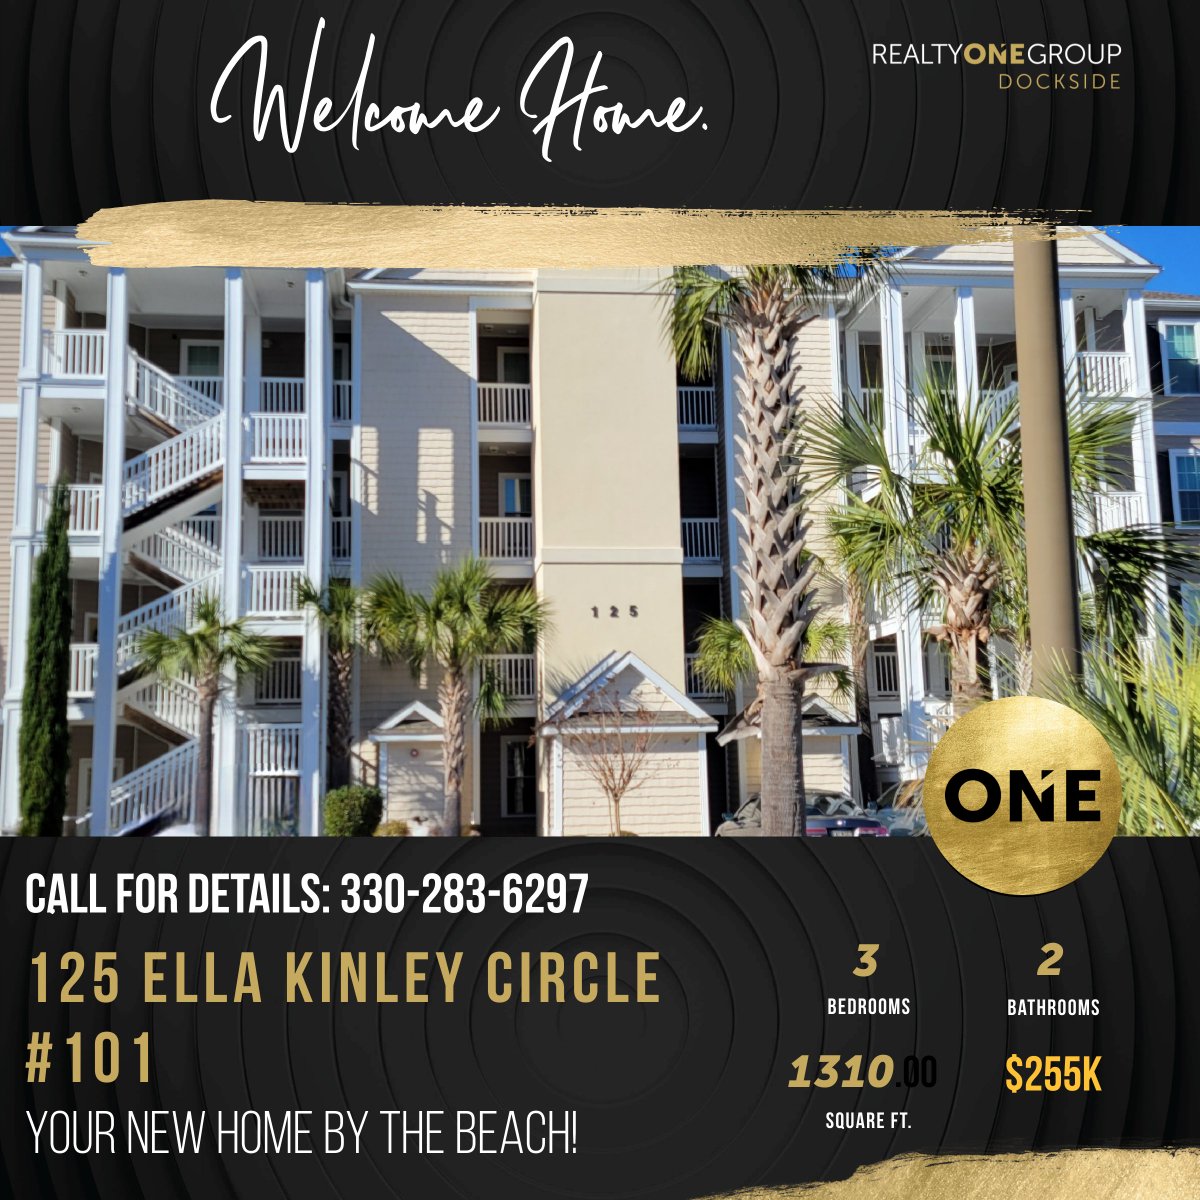 Looking for a 2nd home or a new home close to the beach? Look no more! #surfsidebeachhomes #lovewhereyoulive #livebythebeach #myrtlebeachhomes #locationlocationlocation